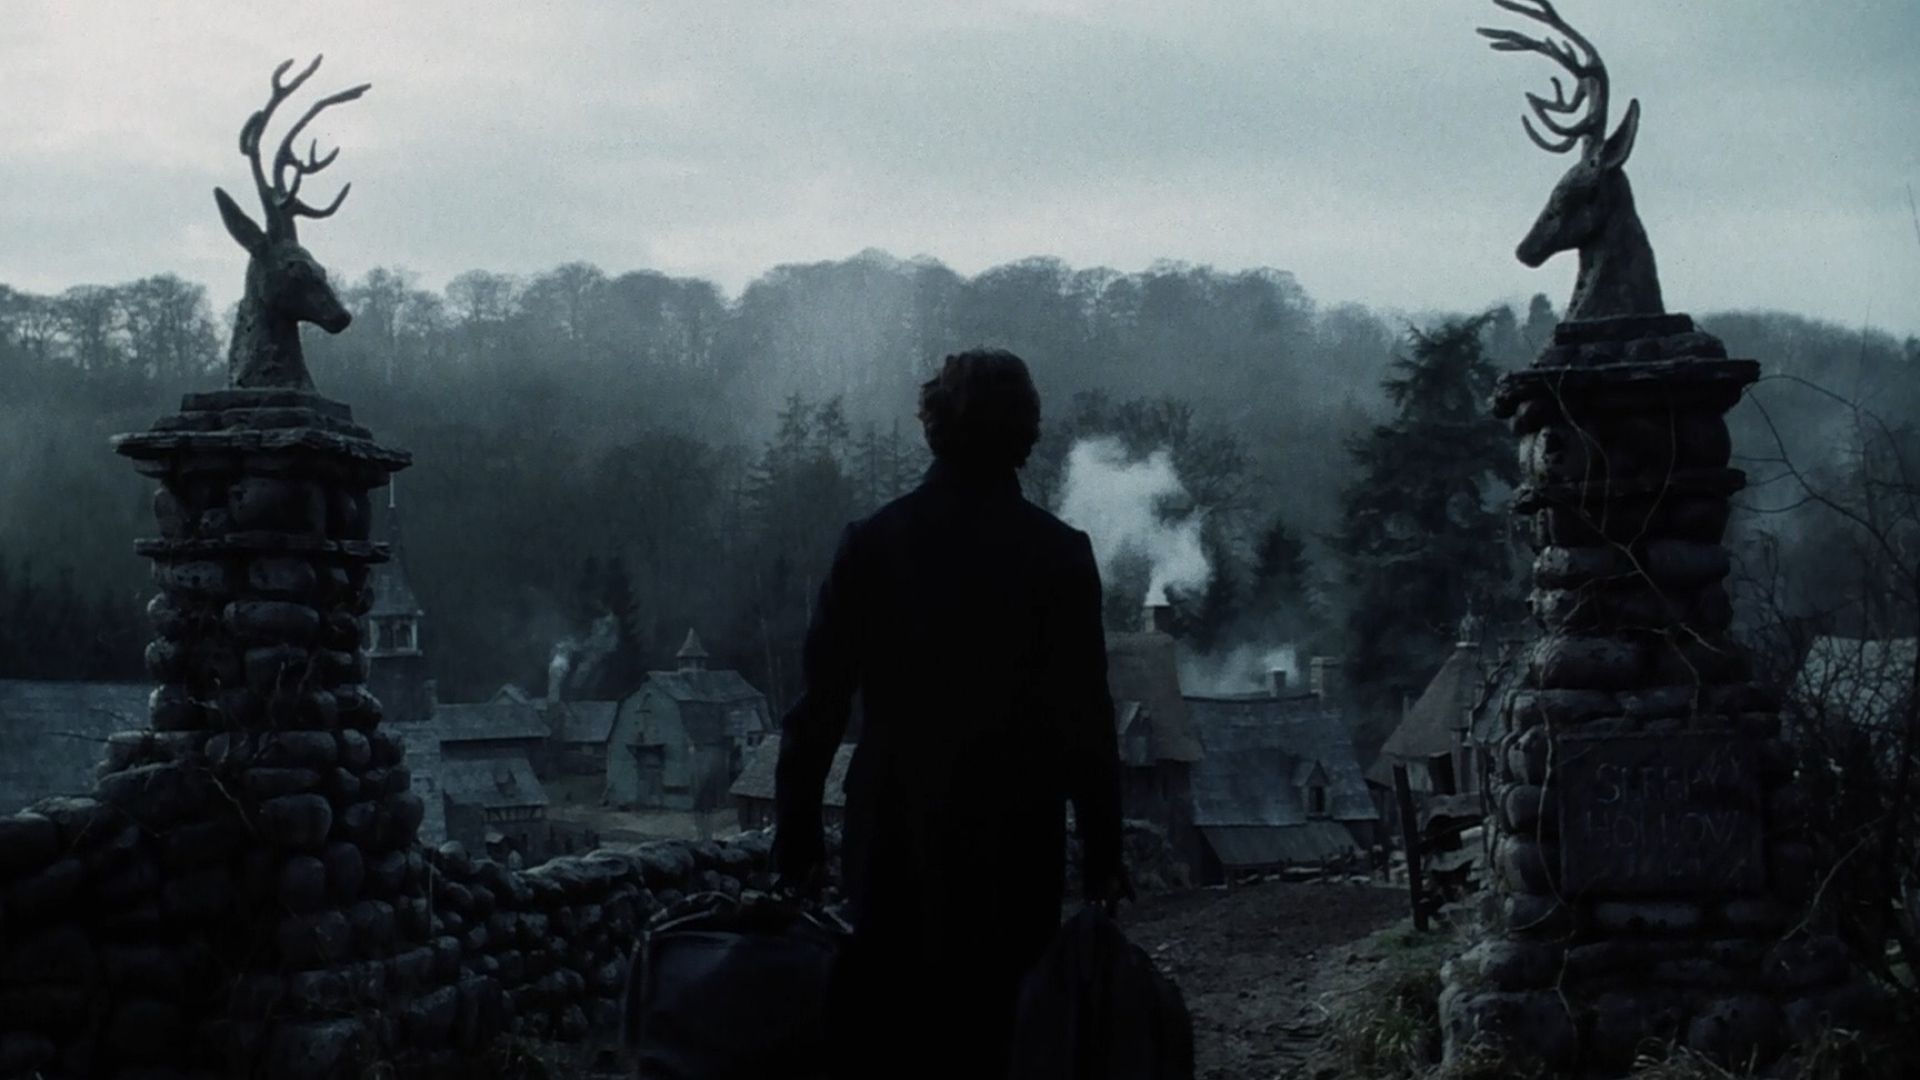 Sleepy Hollow (Movie): Set in the 18th century and features a dark and gothic atmosphere. 1920x1080 Full HD Wallpaper.